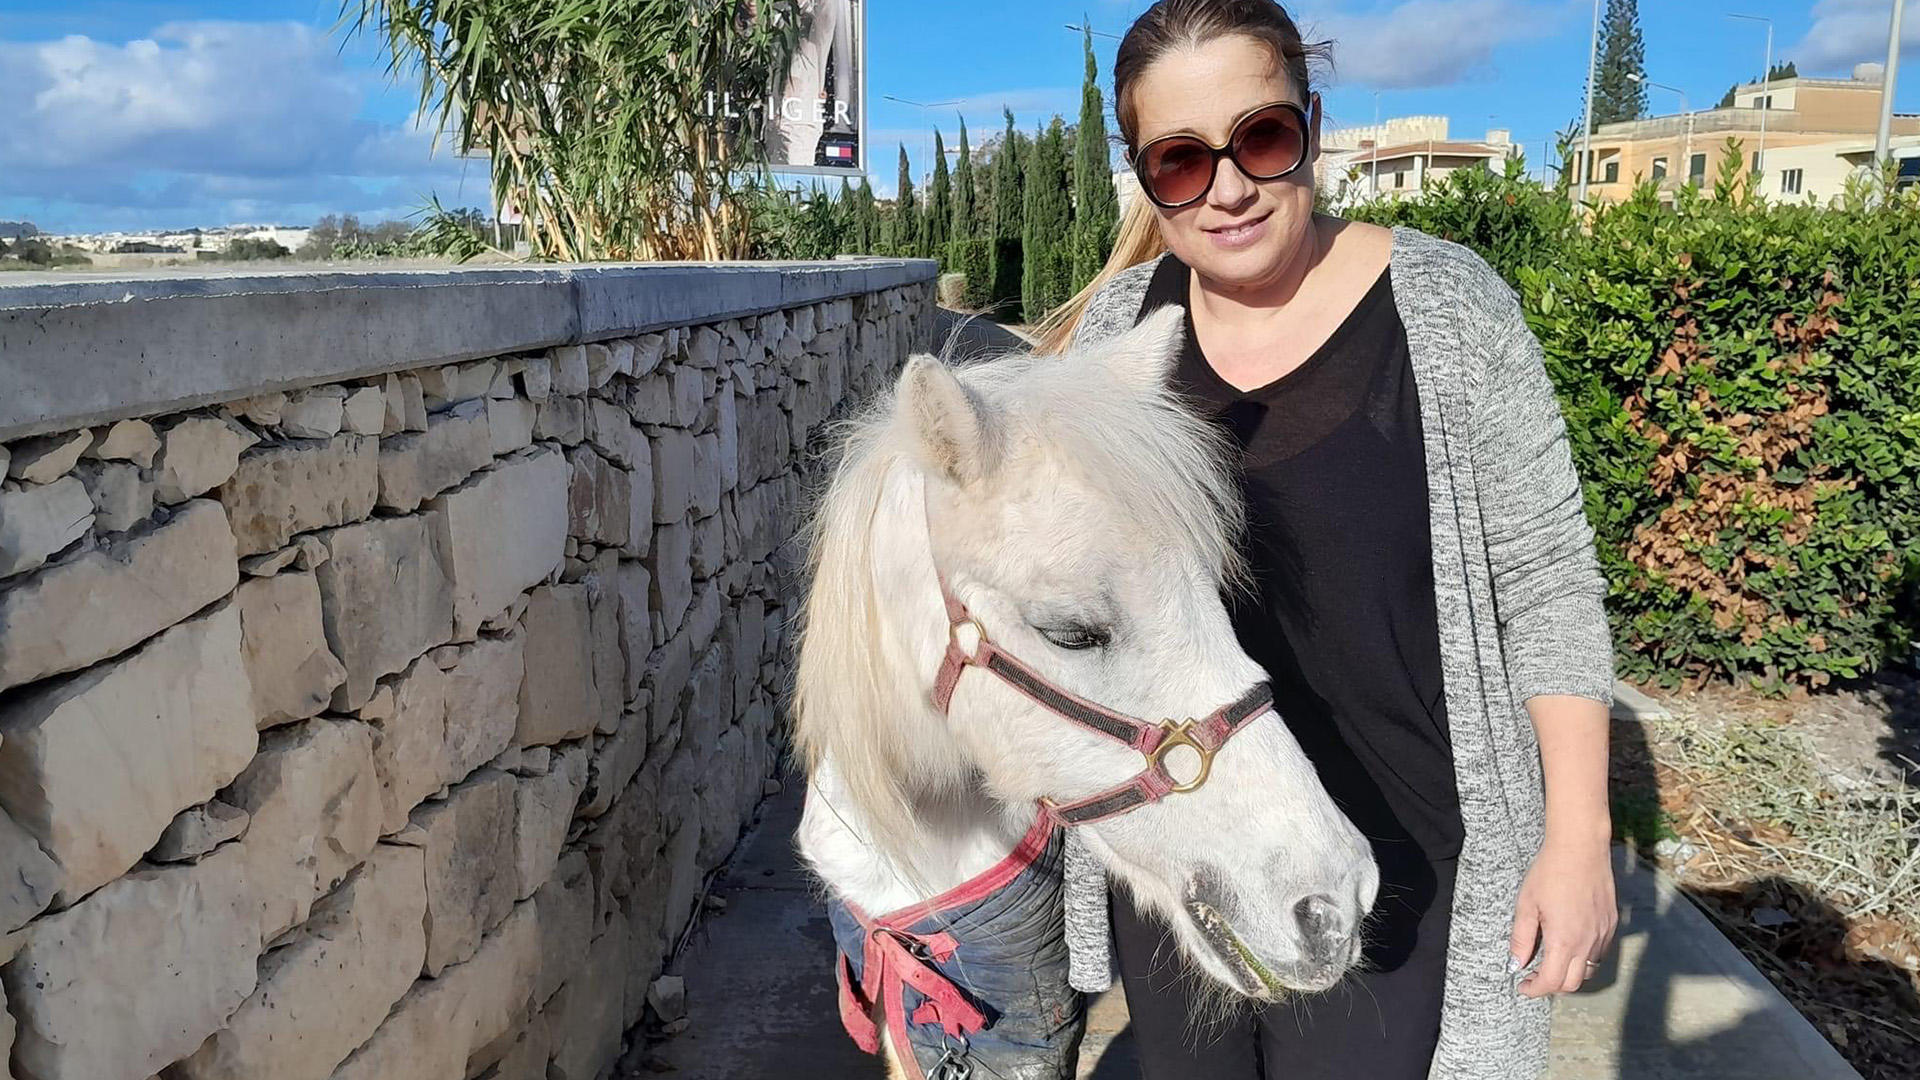 Woman Who Rescues Runaway Horse Urges People To "Be Kind"